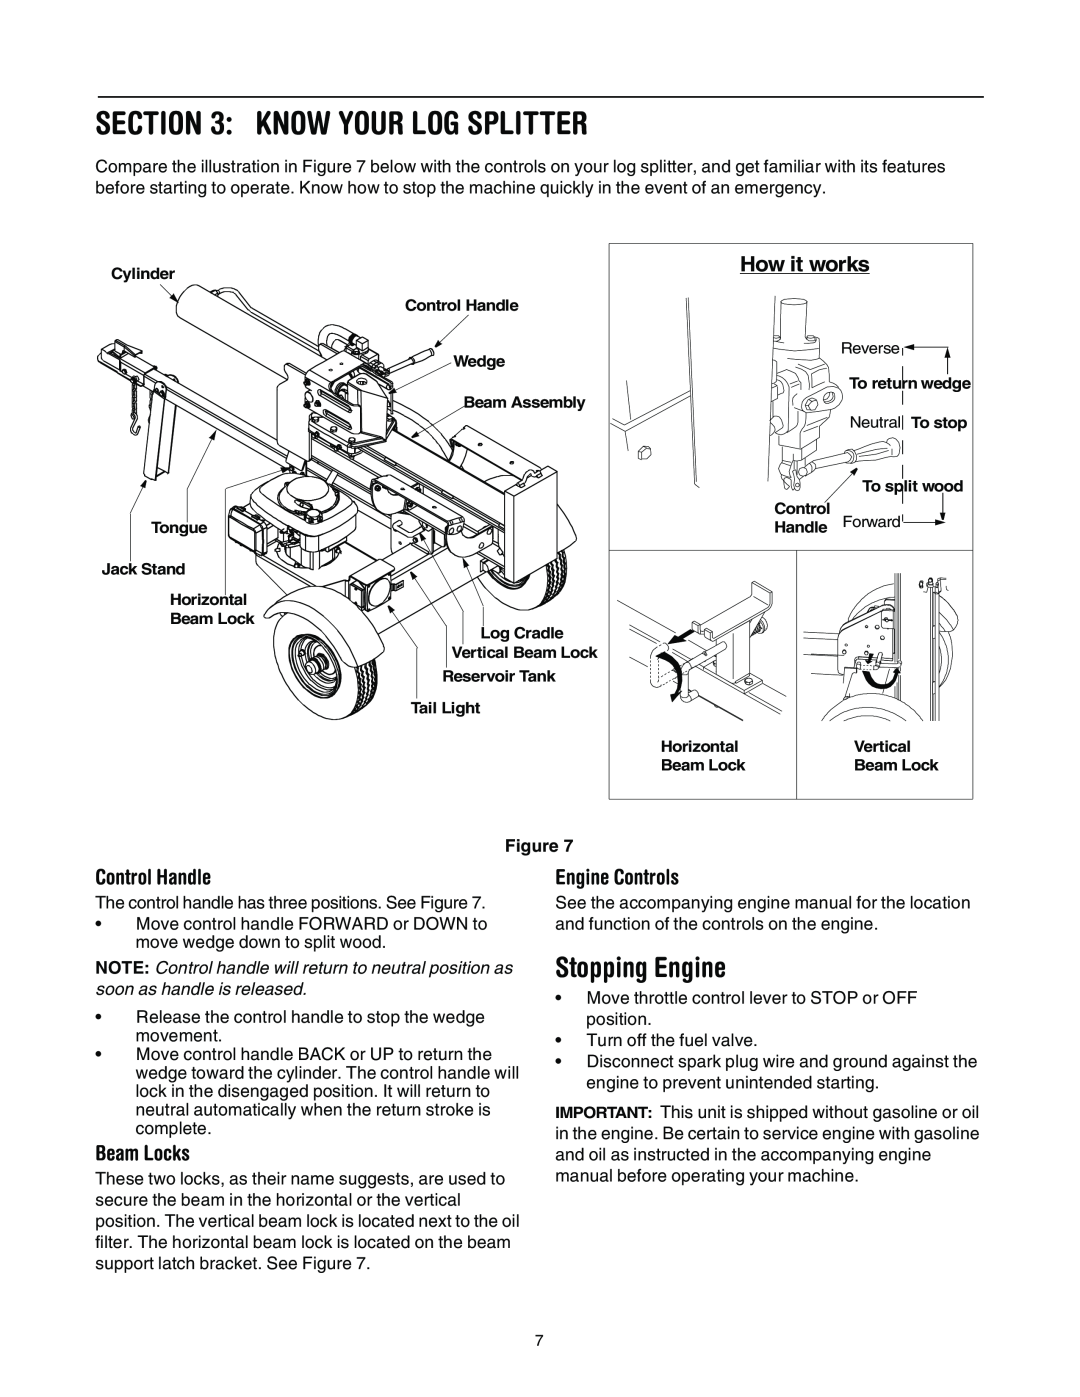 Troy-Bilt LS275 manual Know Your Log Splitter, Stopping Engine, How it works, Control Handle, Beam Locks, Engine Controls 